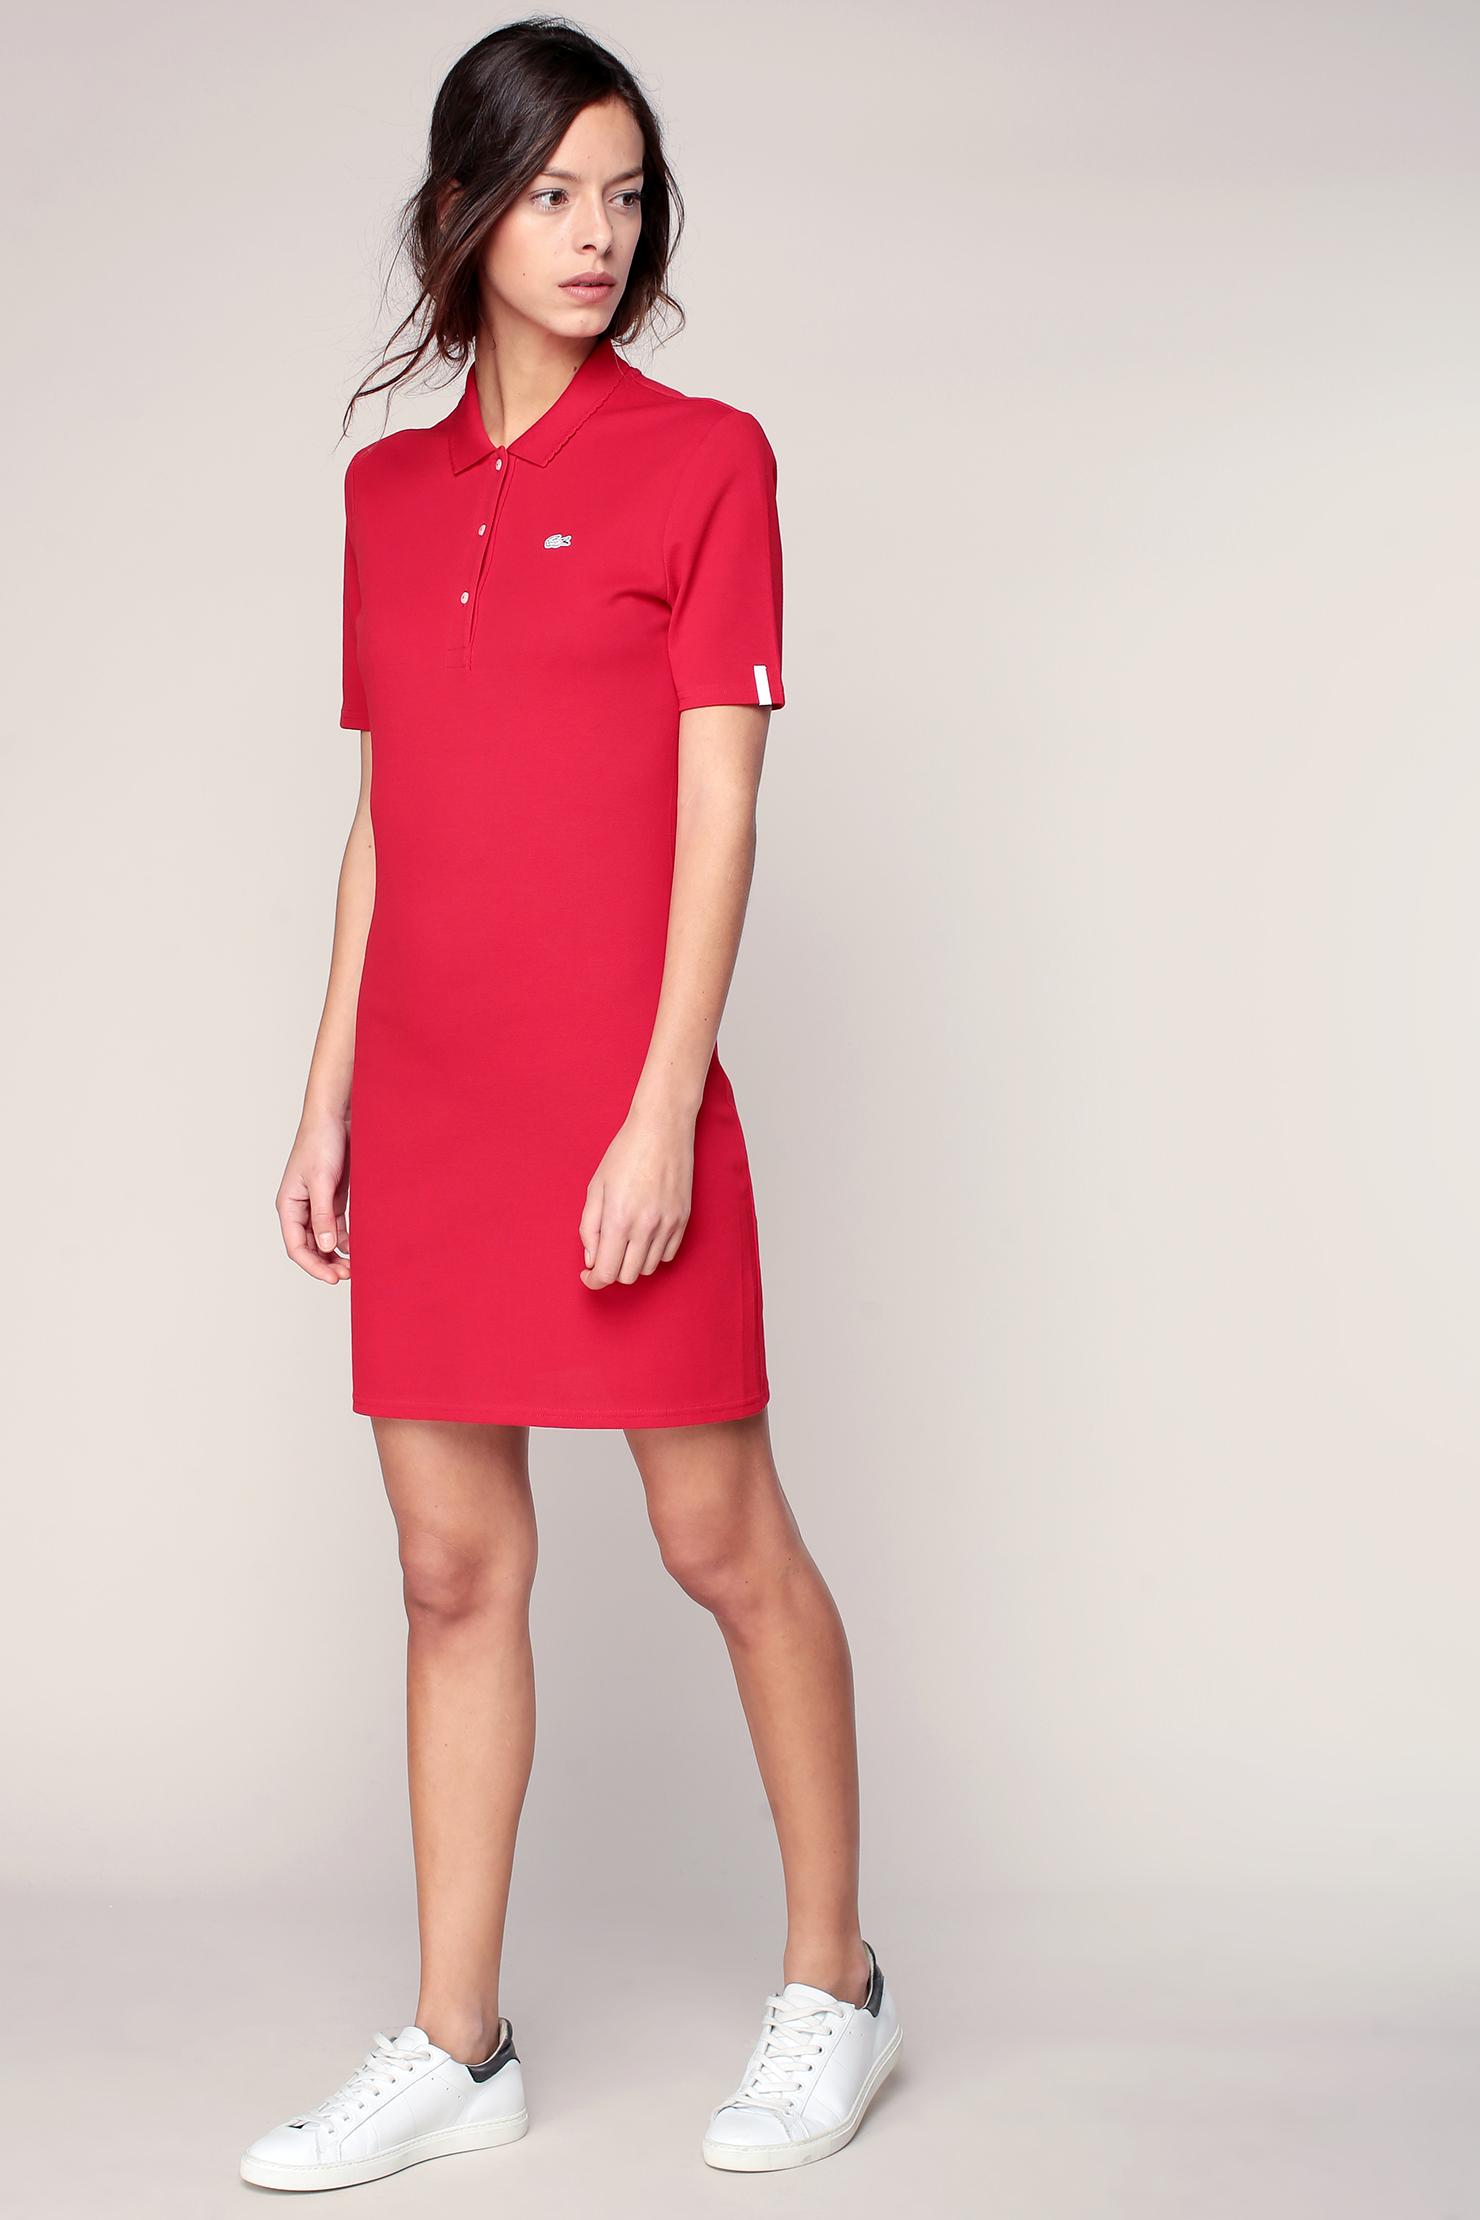 Lyst - Lacoste Mid-length Dresse in Red